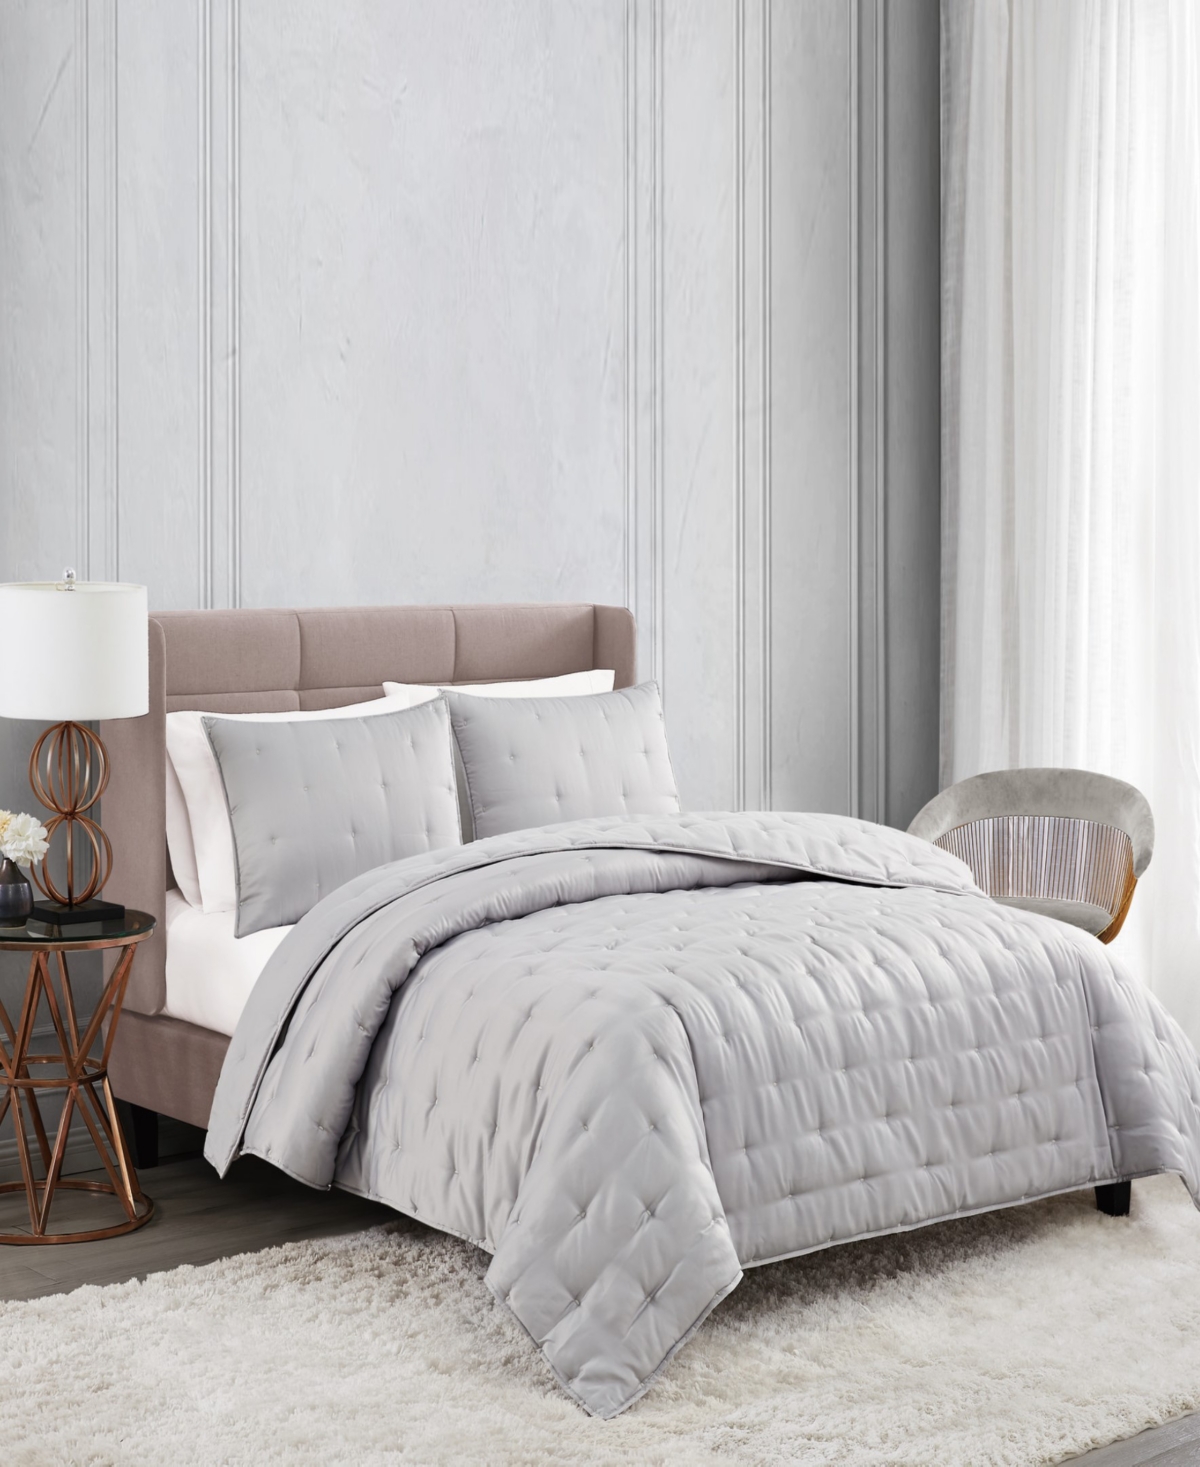 Badgley Mischka Home Tufted Ivory 2 Piece Quilt Set, Twin Xl In Gray